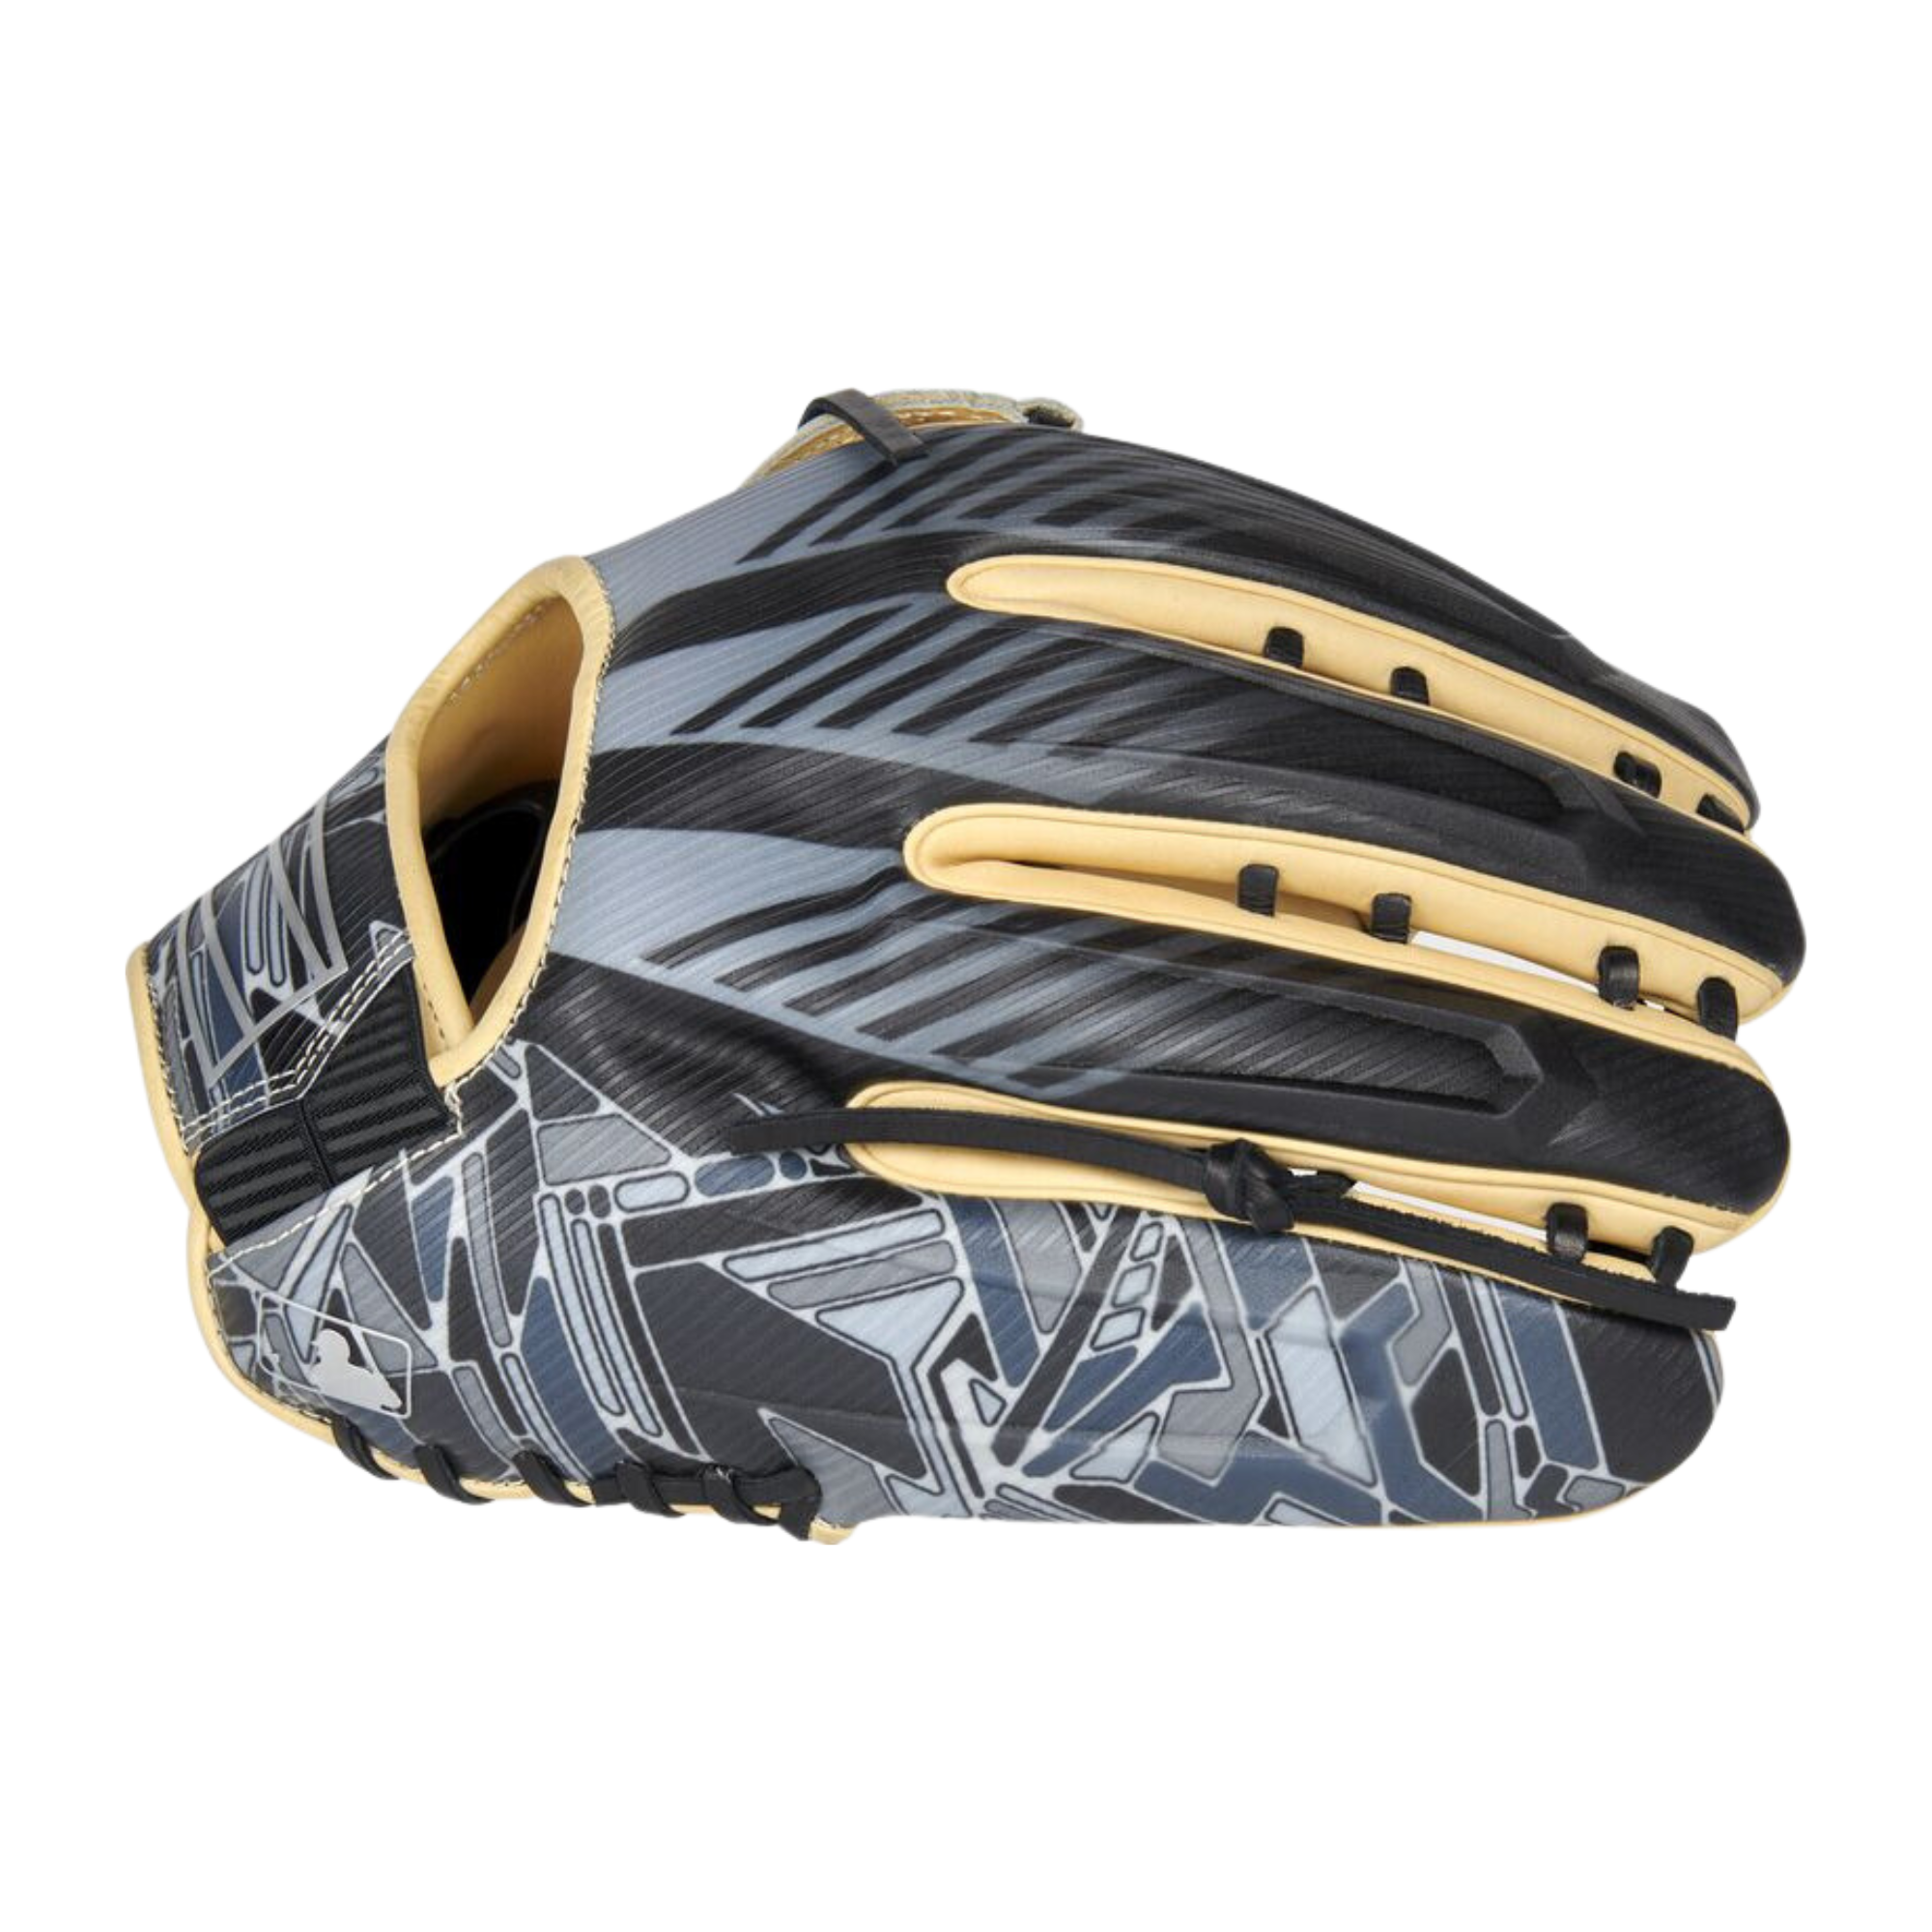 2022 Limited Edition REV1X 11.75-Inch Infield Glove